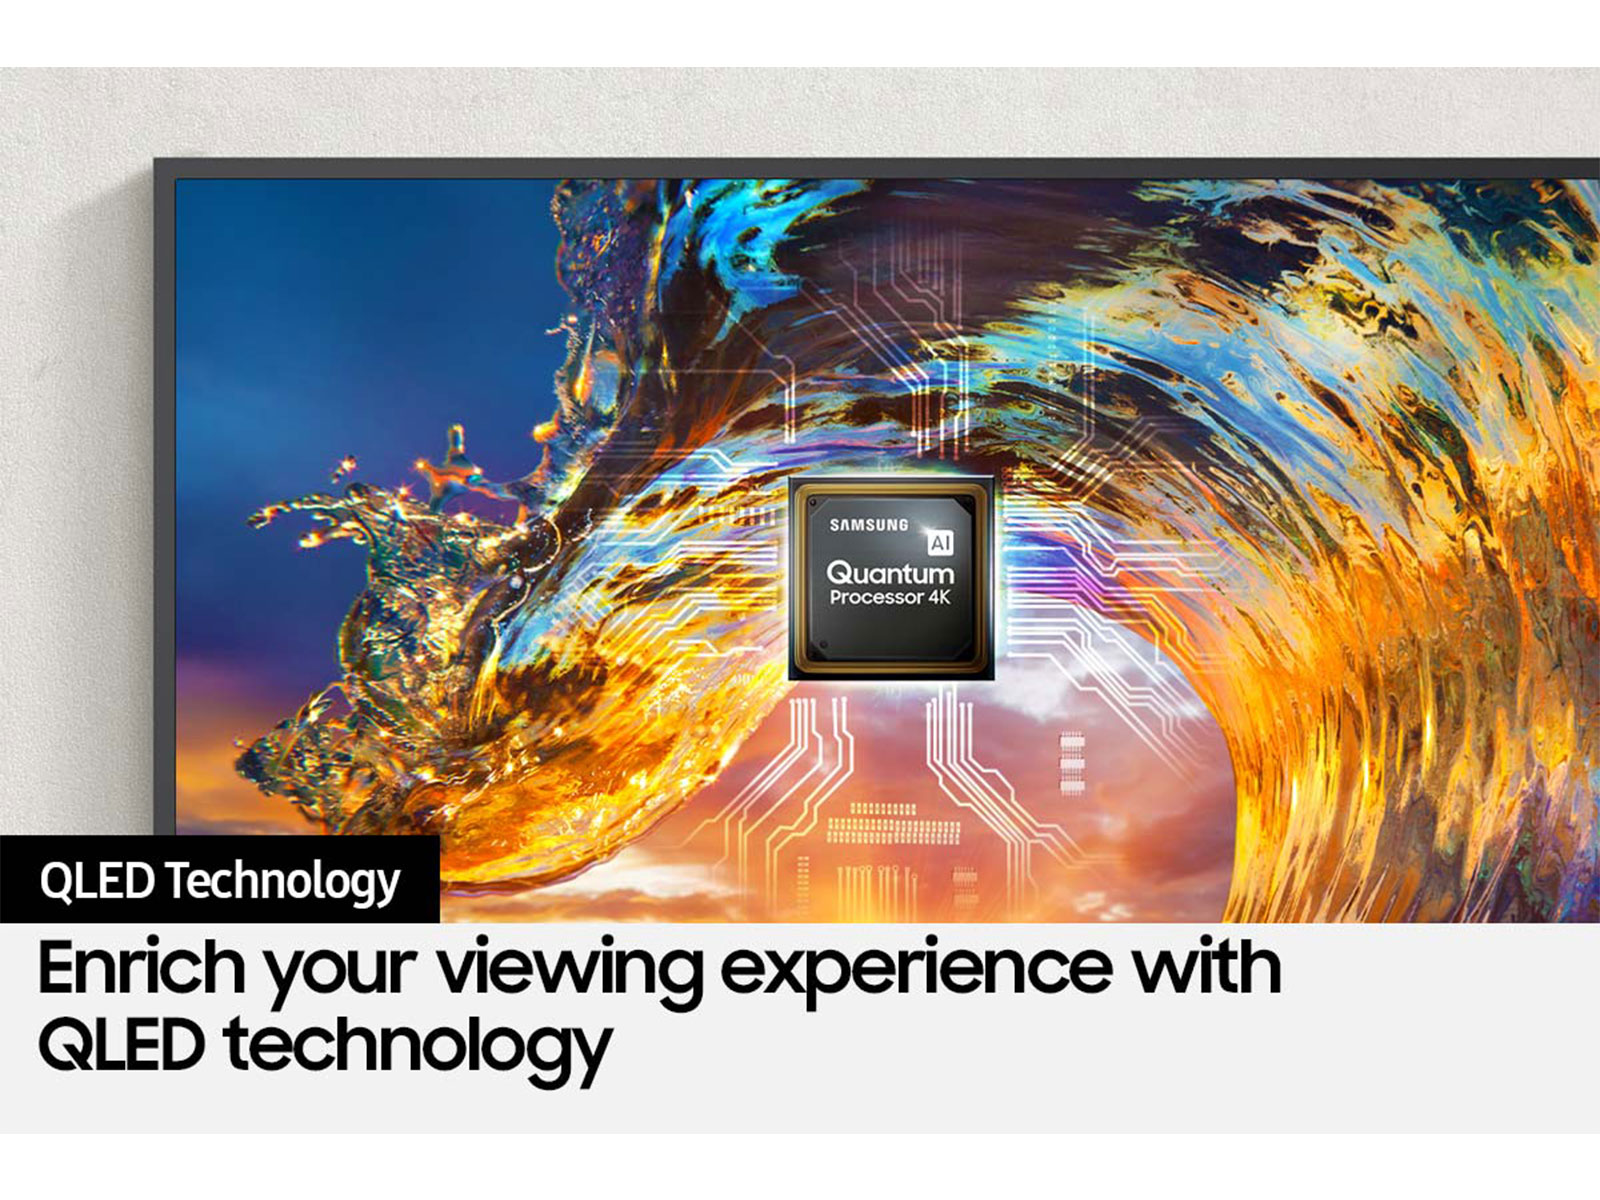 https://image-us.samsung.com/SamsungUS/home/televisions-and-home-theater/tvs/the-frame/ls03a/gallery/PDP-GALLERY-The-Frame-08-1600x1200.jpg?$product-details-jpg$